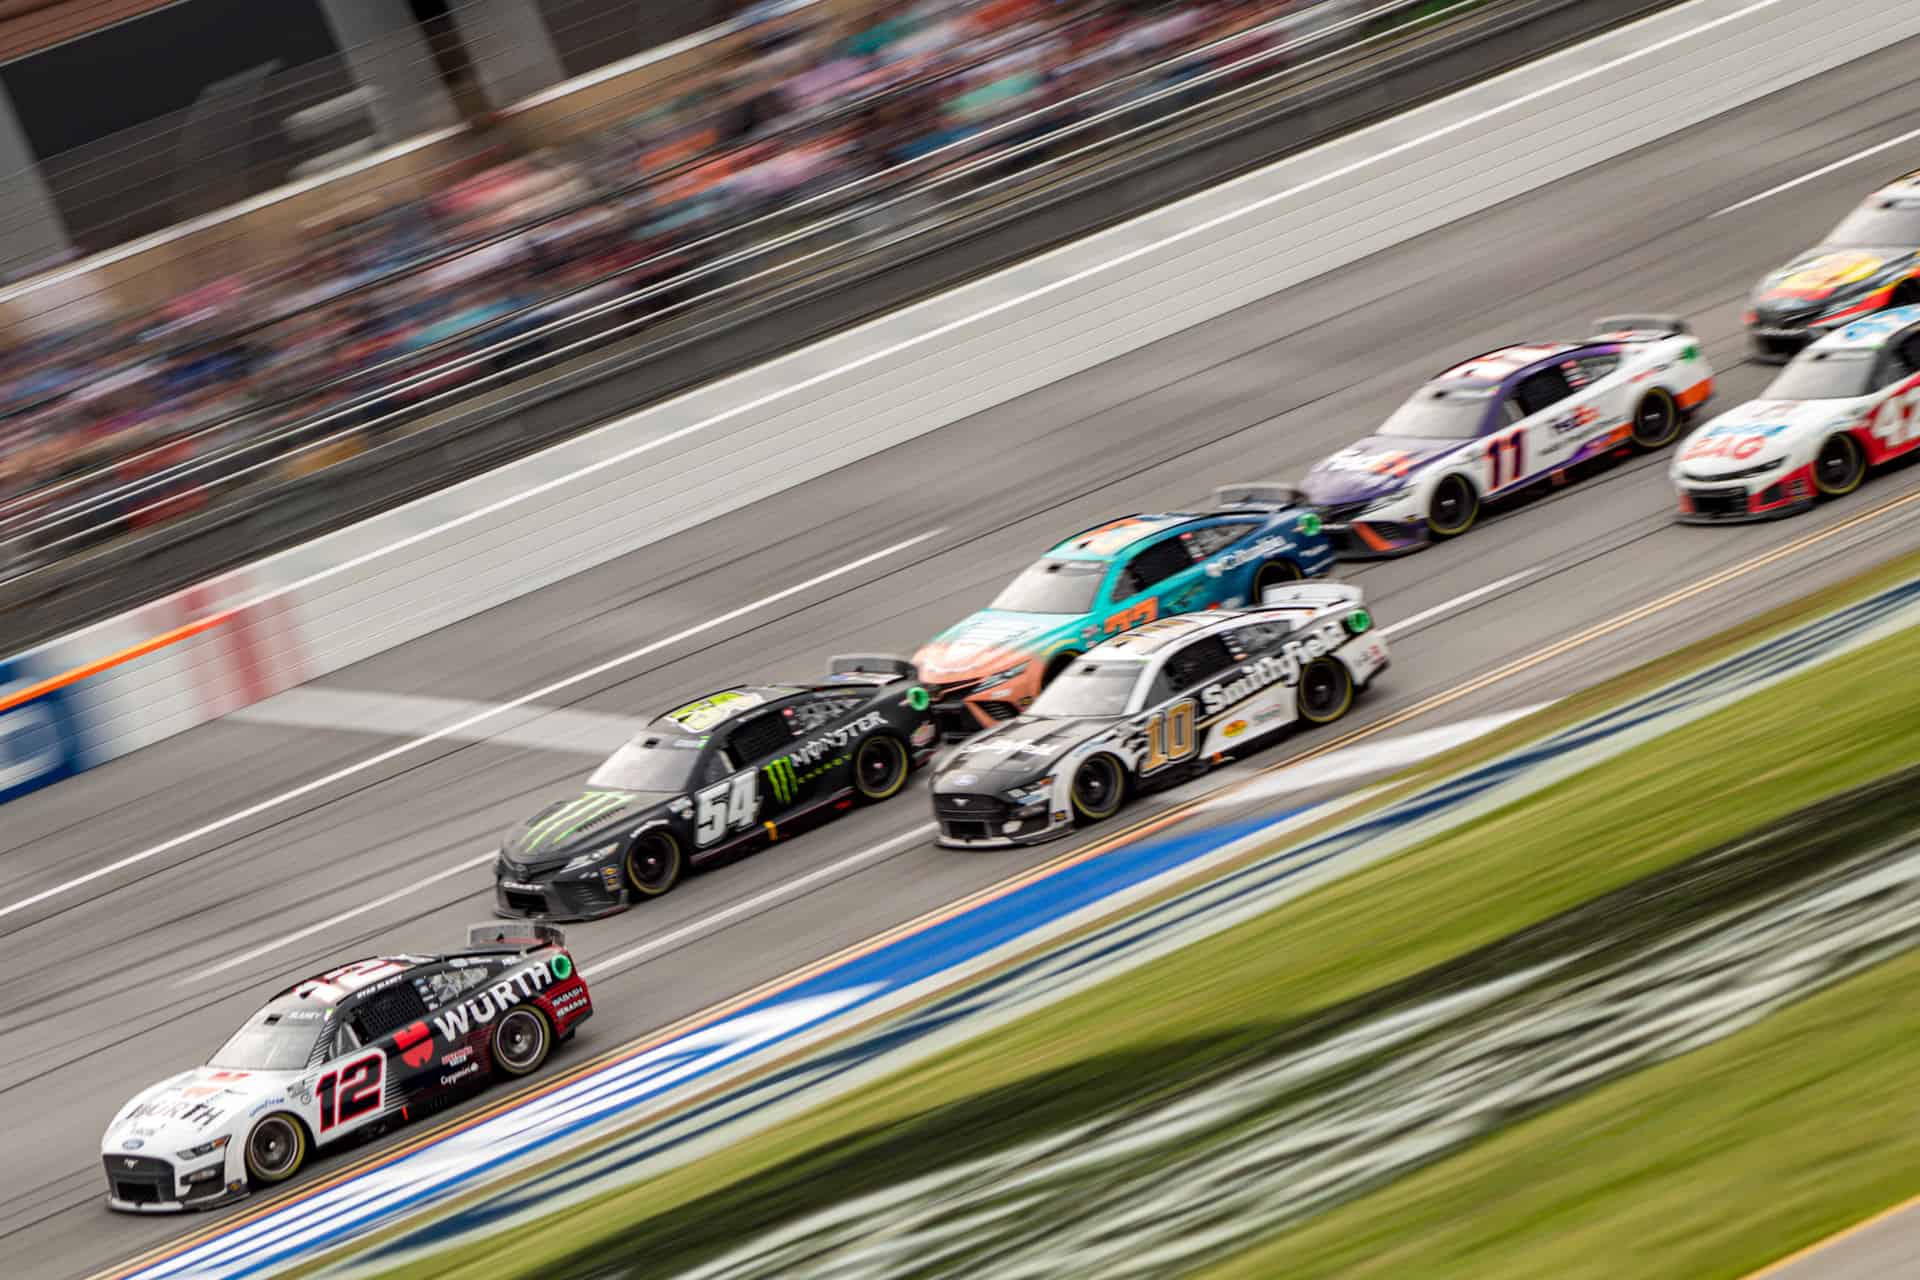 Ryan Blaney leads late in the 2023 Geico 500 at Talladega Superspeedway in the NASCAR Cup Series. Photo by Christian Koelle / Kickin' the Tires